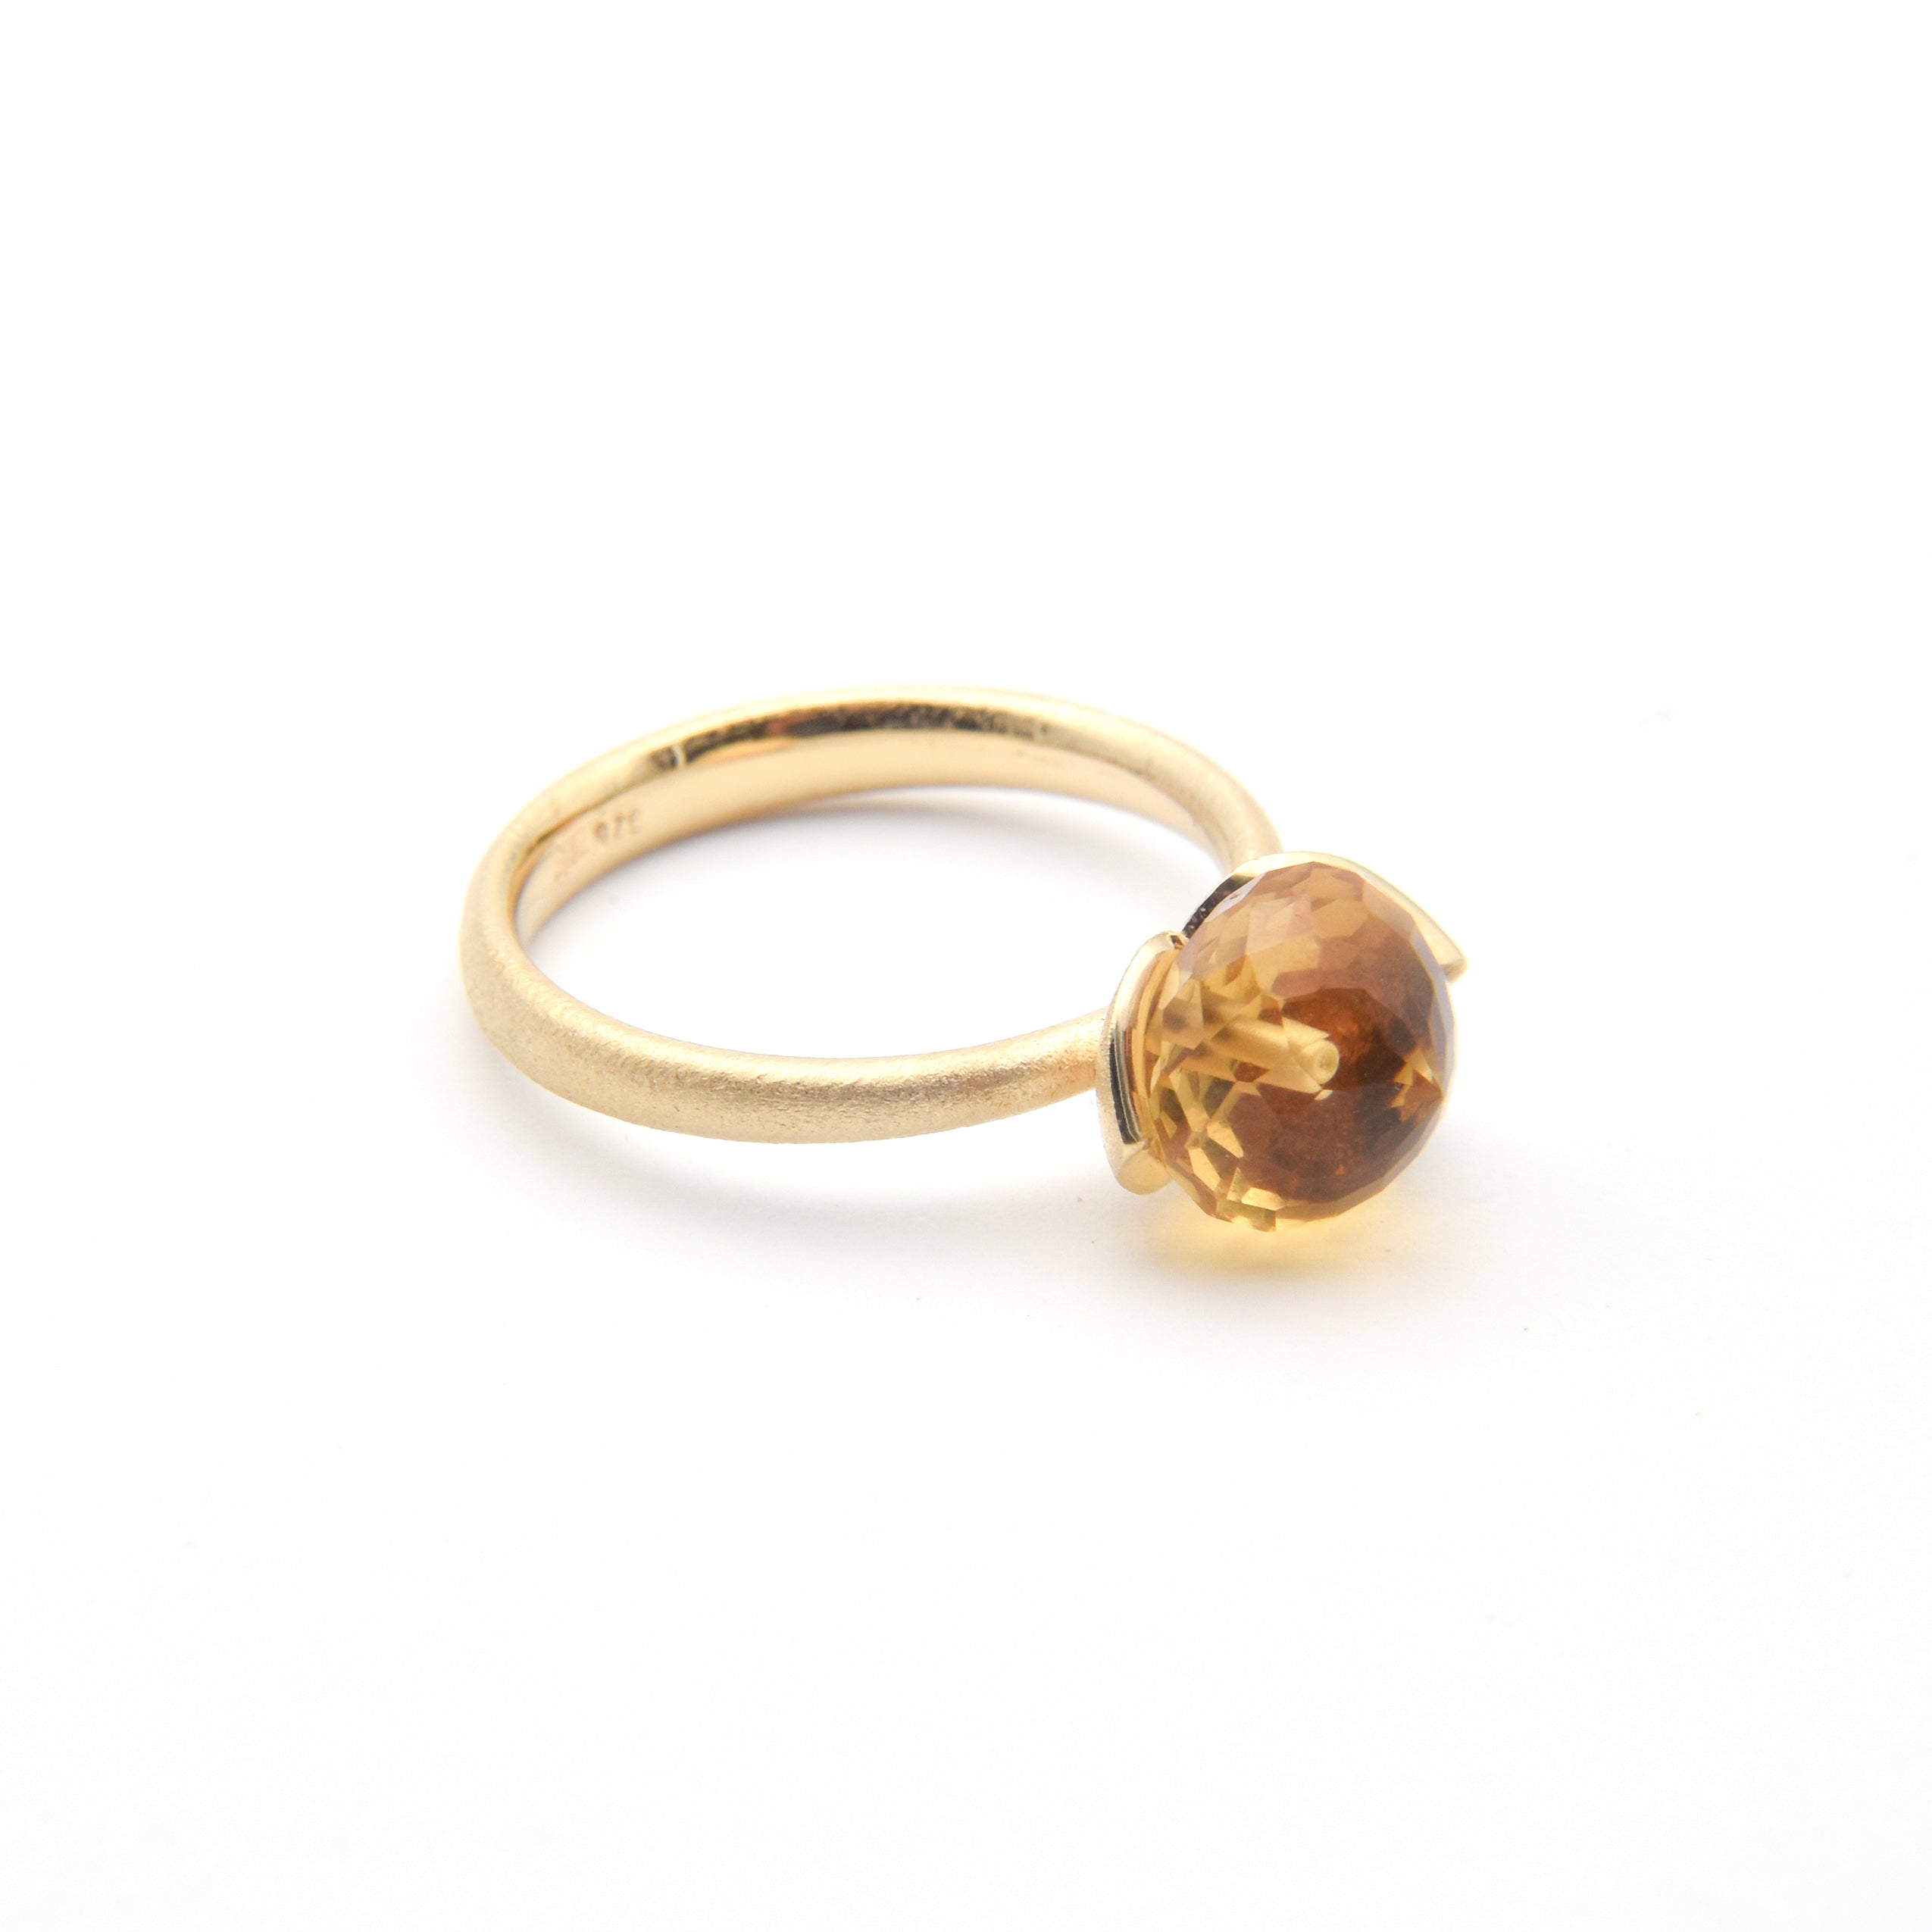 Dolce ring "smal" with champagne quartz 925/-